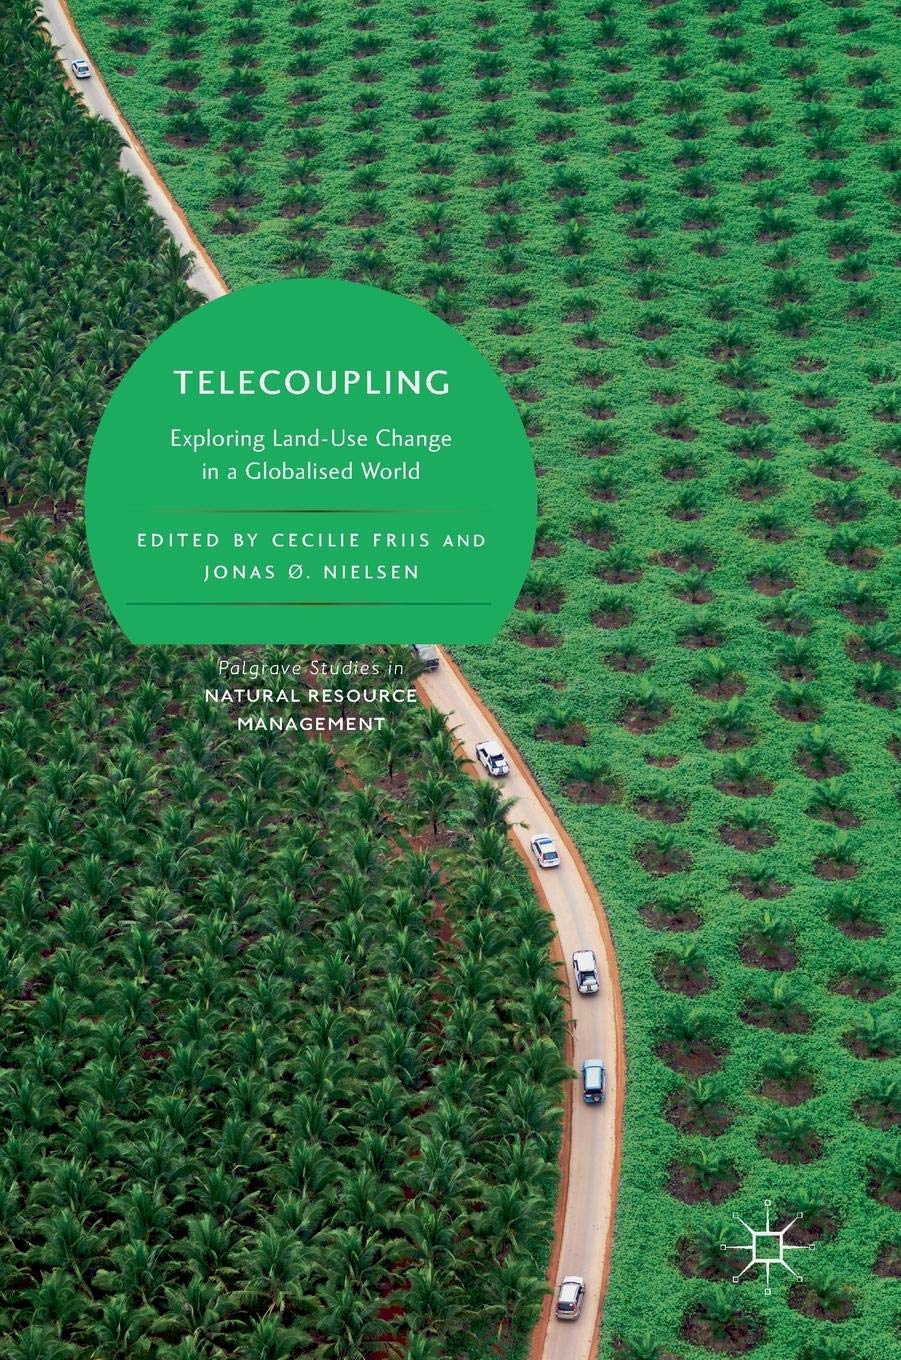 Telecoupling: Exploring Land-Use Change in a Globalised World (Palgrave Studies in Natural Resource Management)